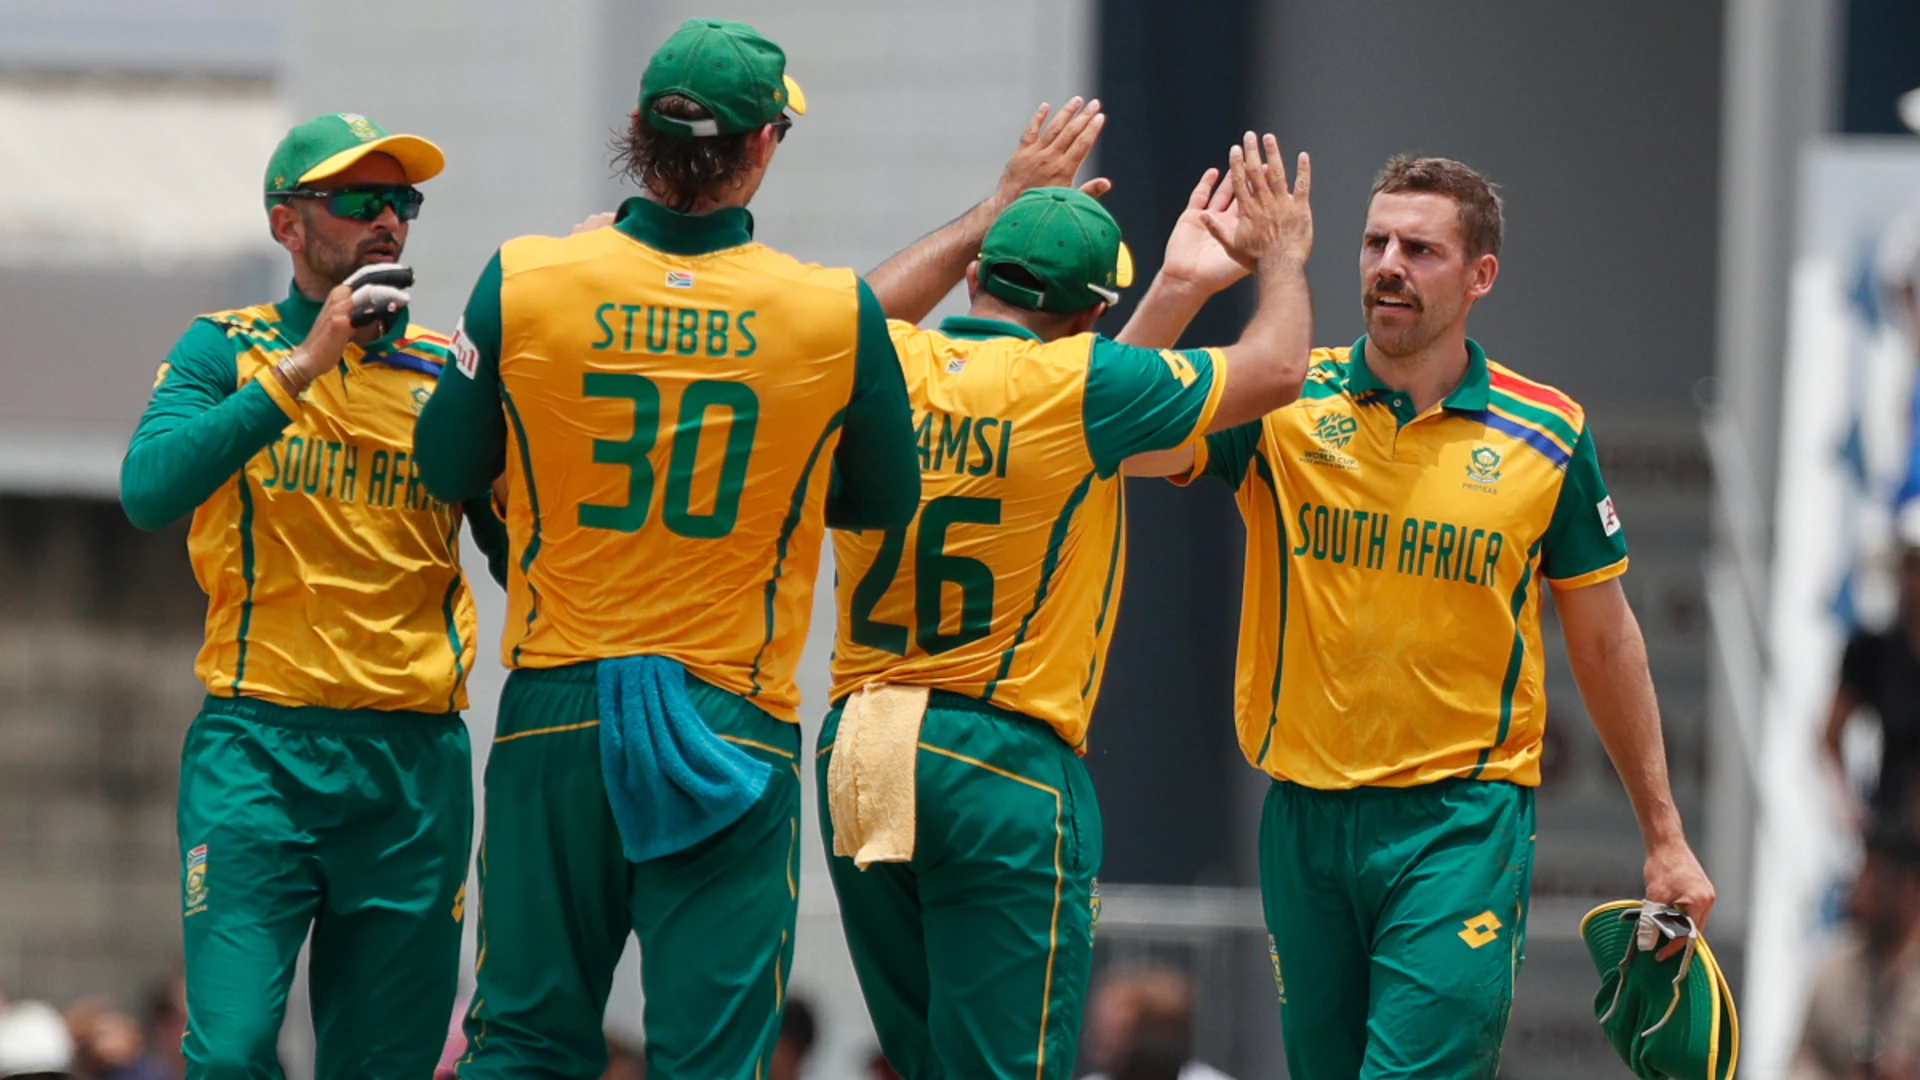 Graeme Smith lauds Proteas Men’s performance at ICC T20 World Cup